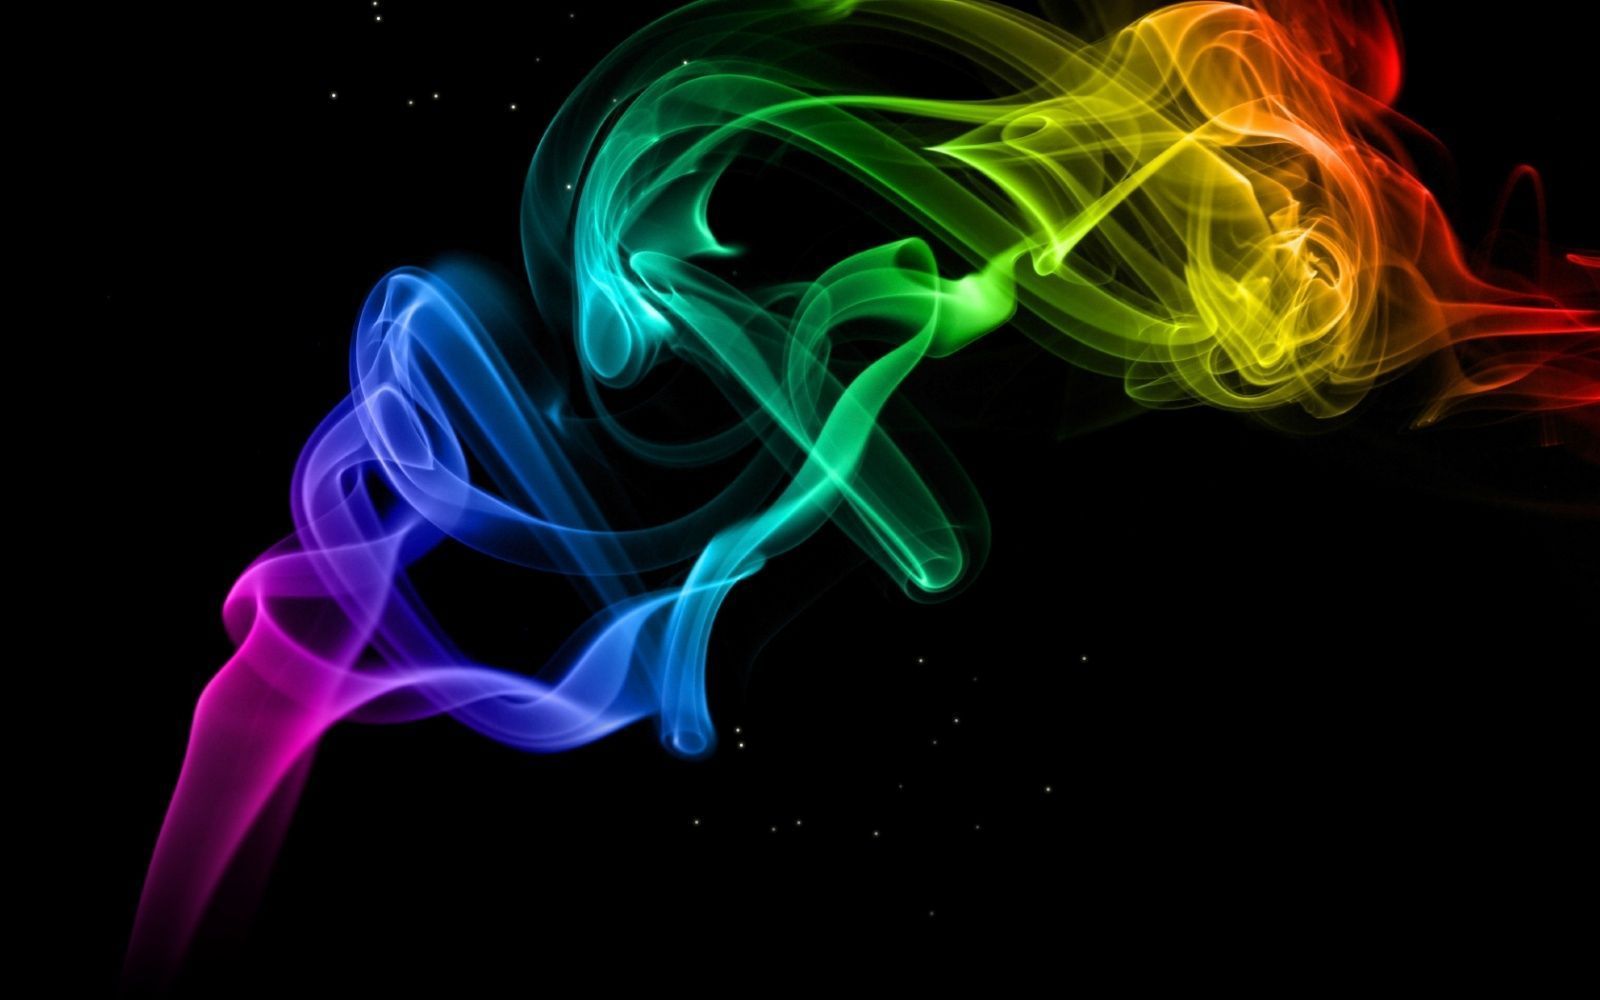 Color Smoke Wallpaper - HD Wallpapers Backgrounds of Your Choice